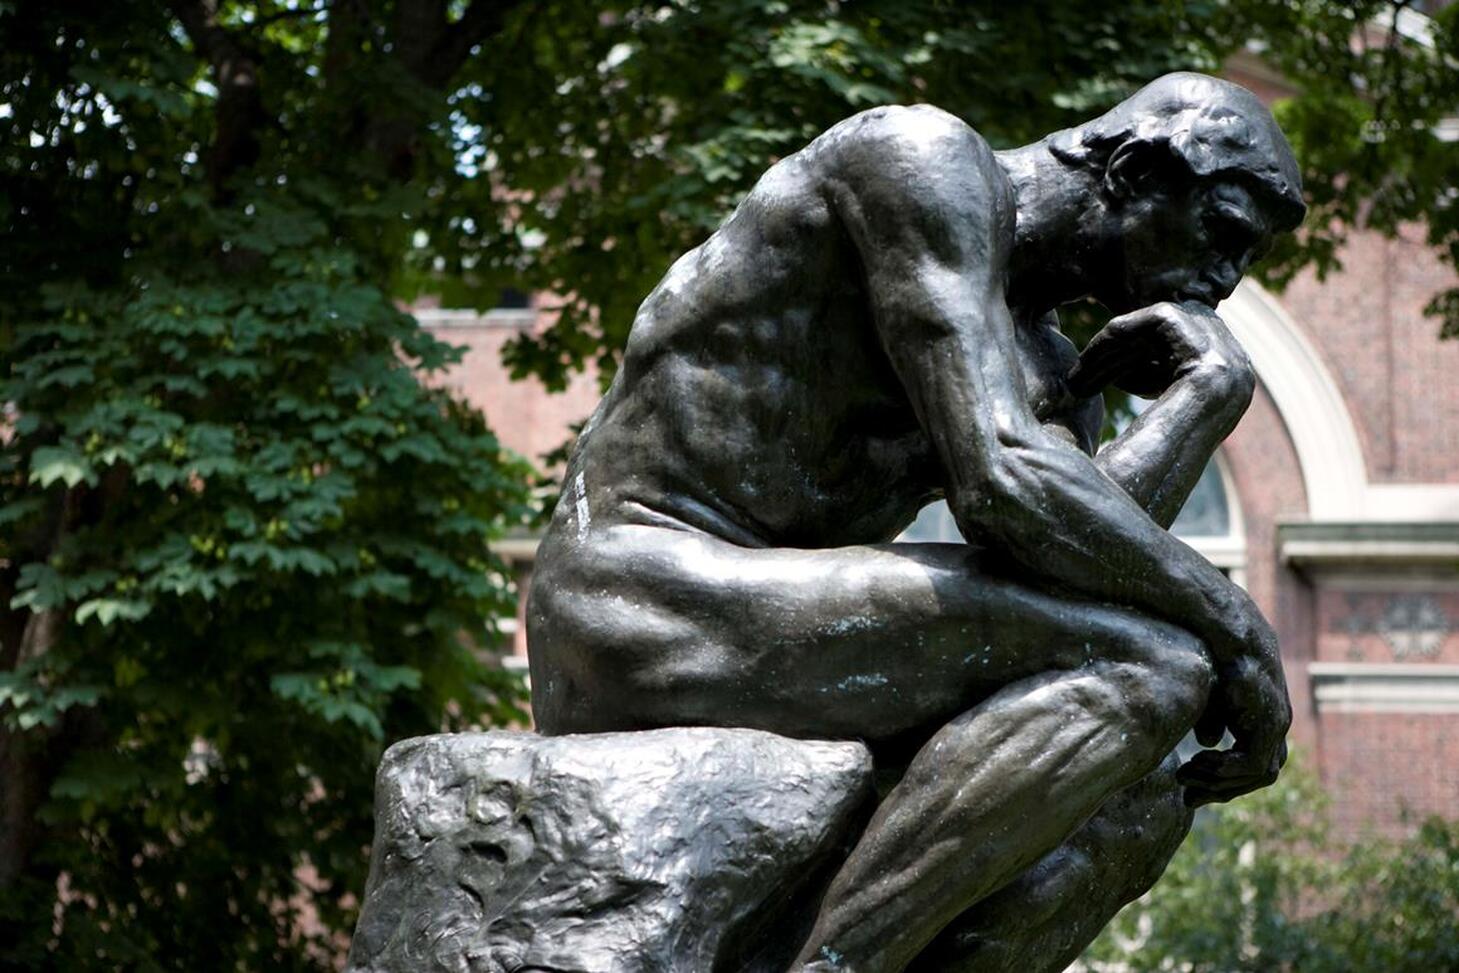 Rodin's The Thinker statue, on Columbia's Morningside campus